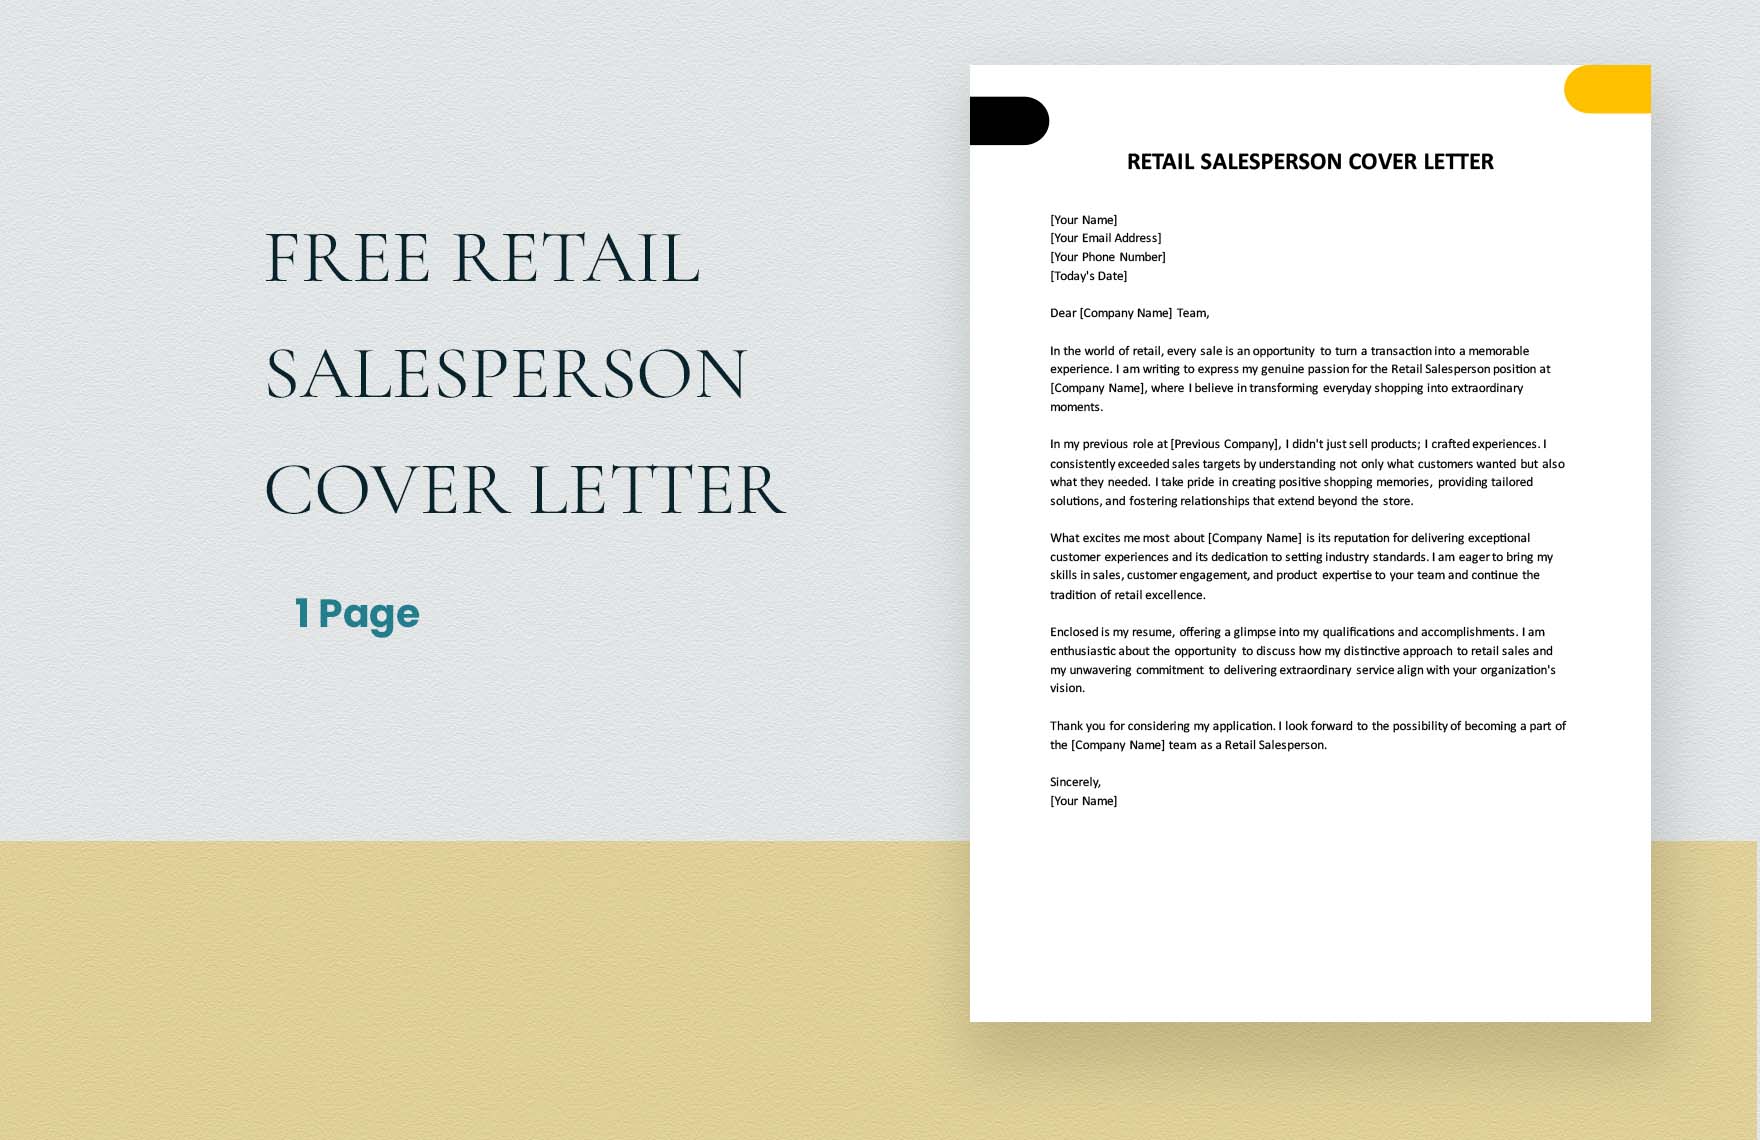 Retail Salesperson Cover Letter